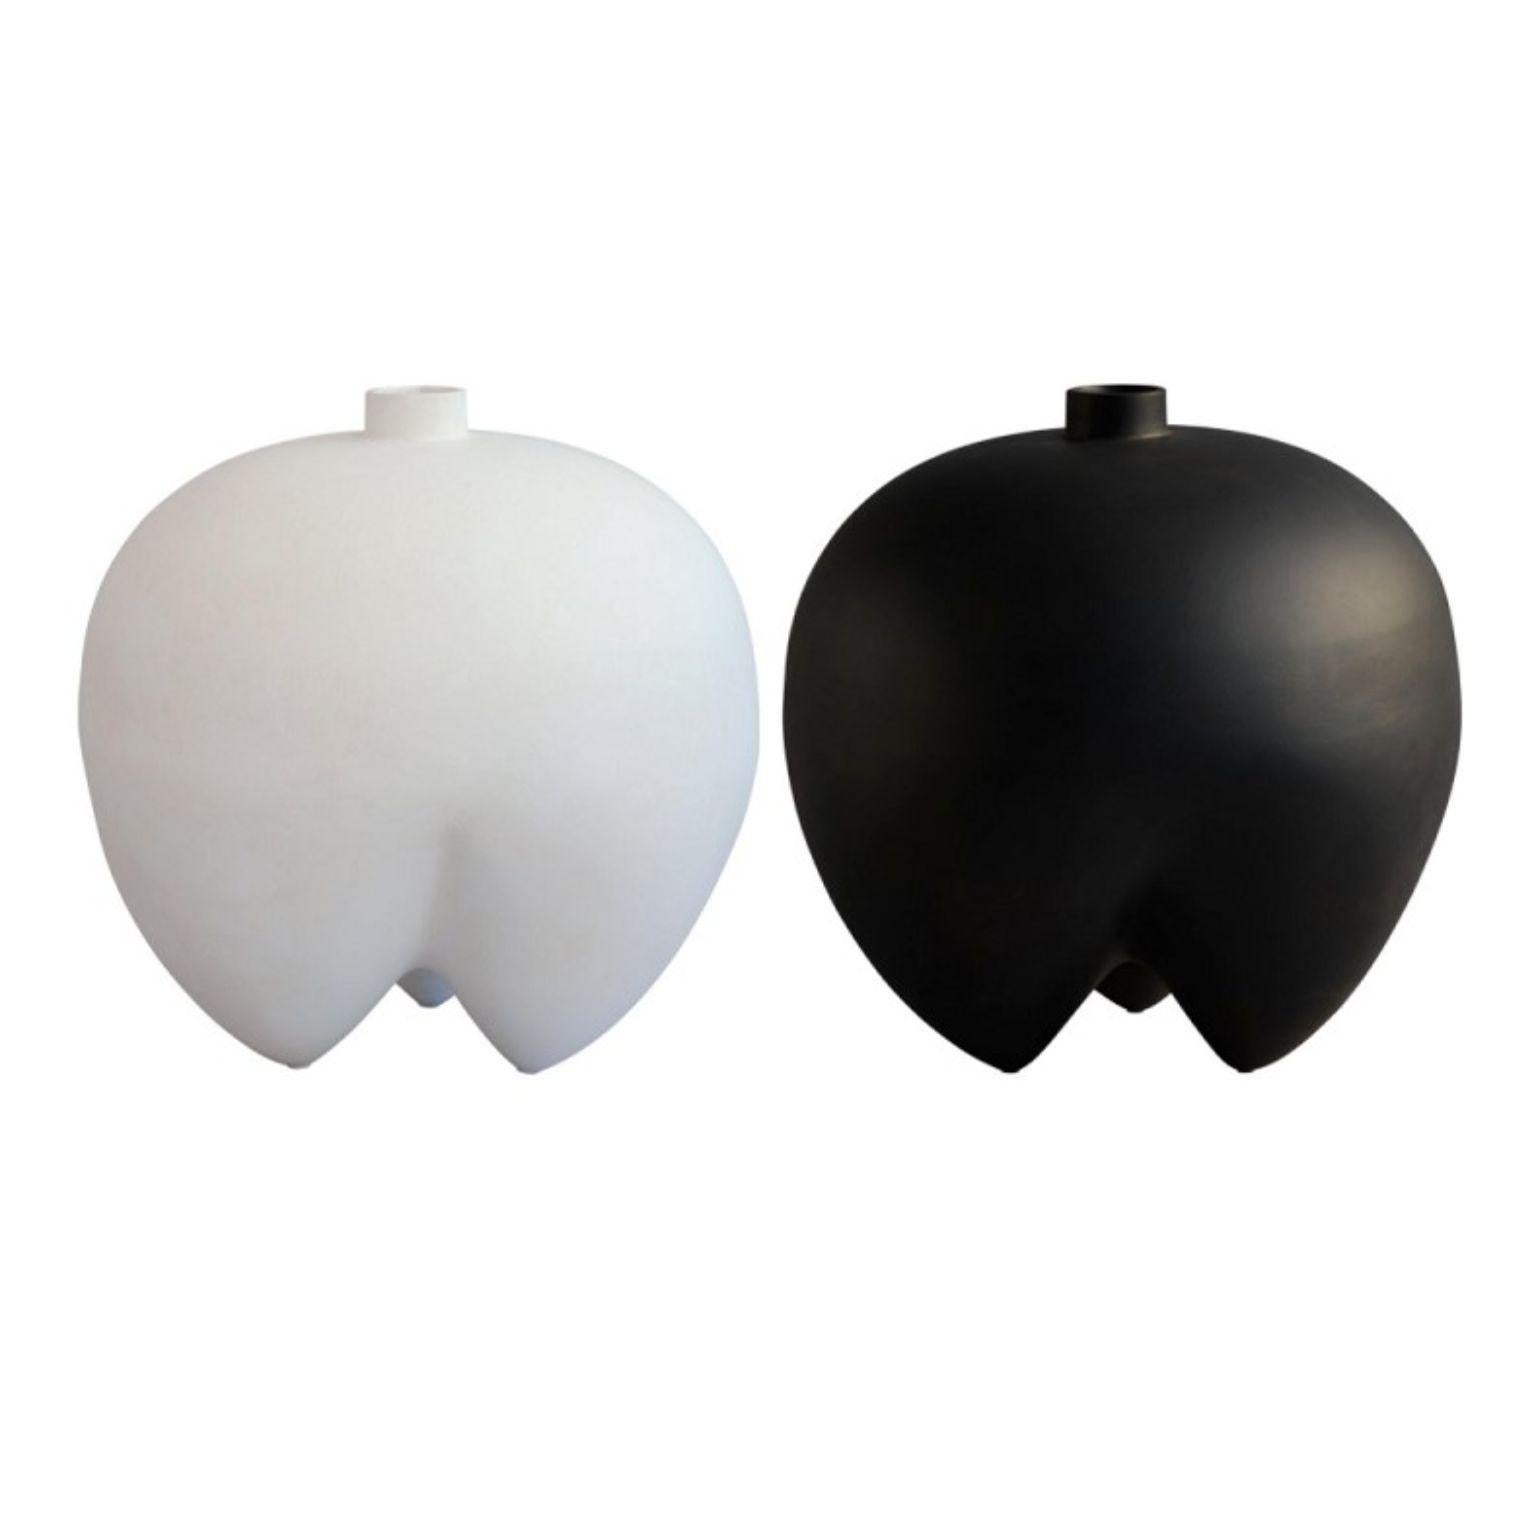 Set of 2 Coffee Sumo Vases Big by 101 Copenhagen
Designed by Kristian Sofus Hansen & Tommy Hyldahl
Dimensions: L45 / W45 / H45 CM
Materials: Ceramic

Sumo celebrates the human body. As a reference to the Japanese sport Sumo, all vases are